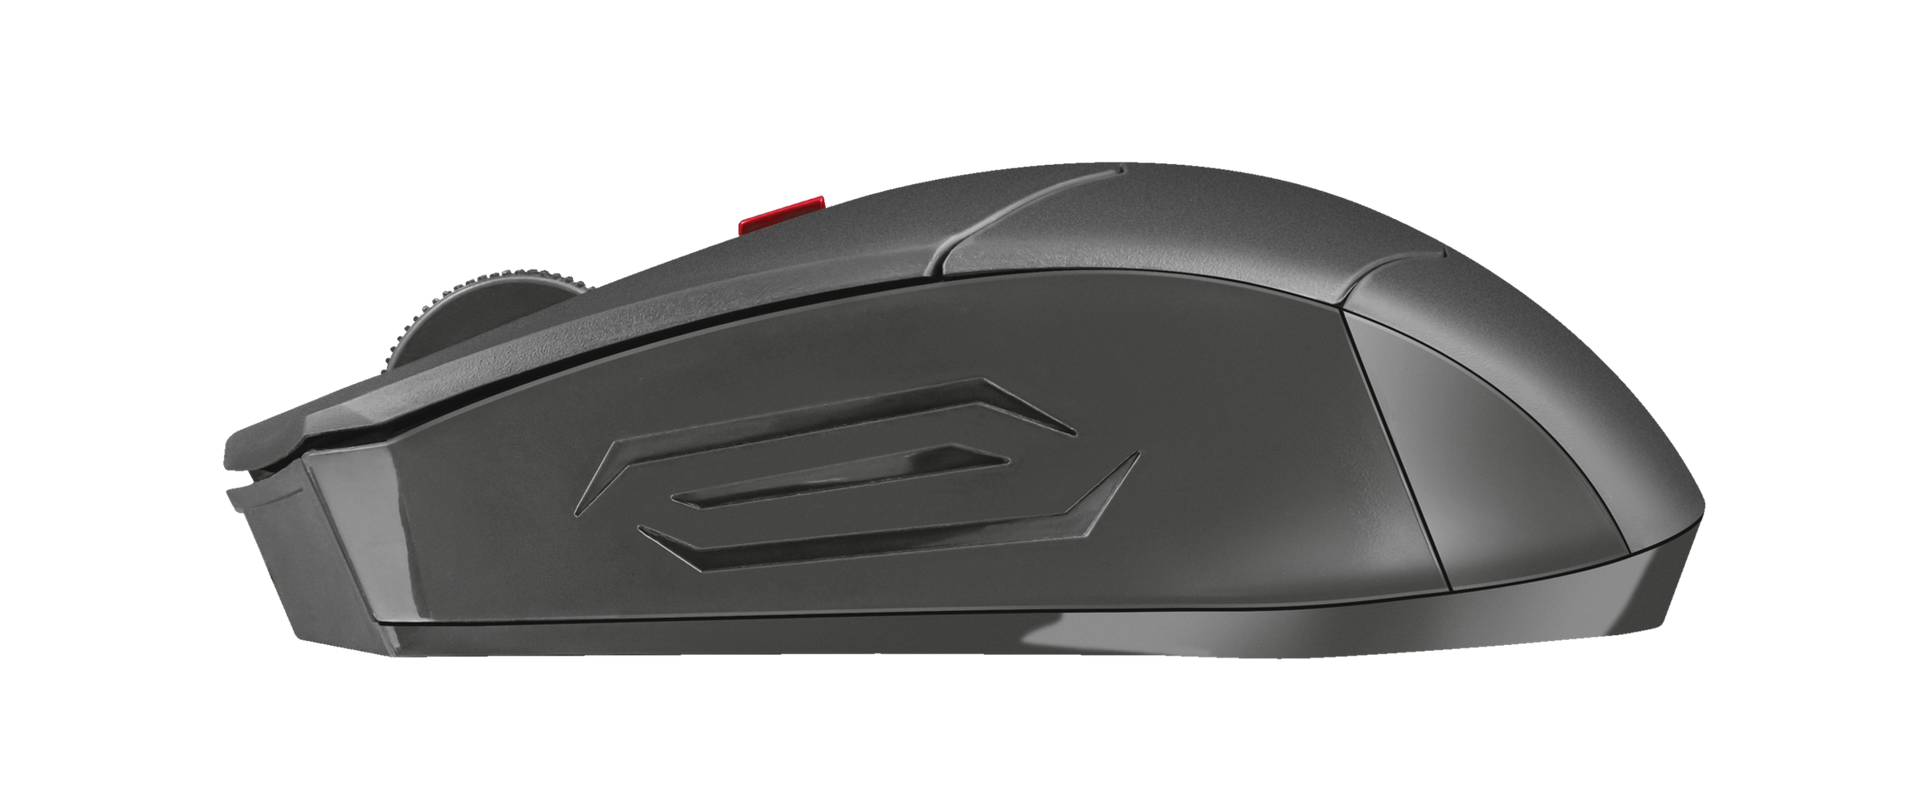 Ziva Wireless Gaming Mouse-Side